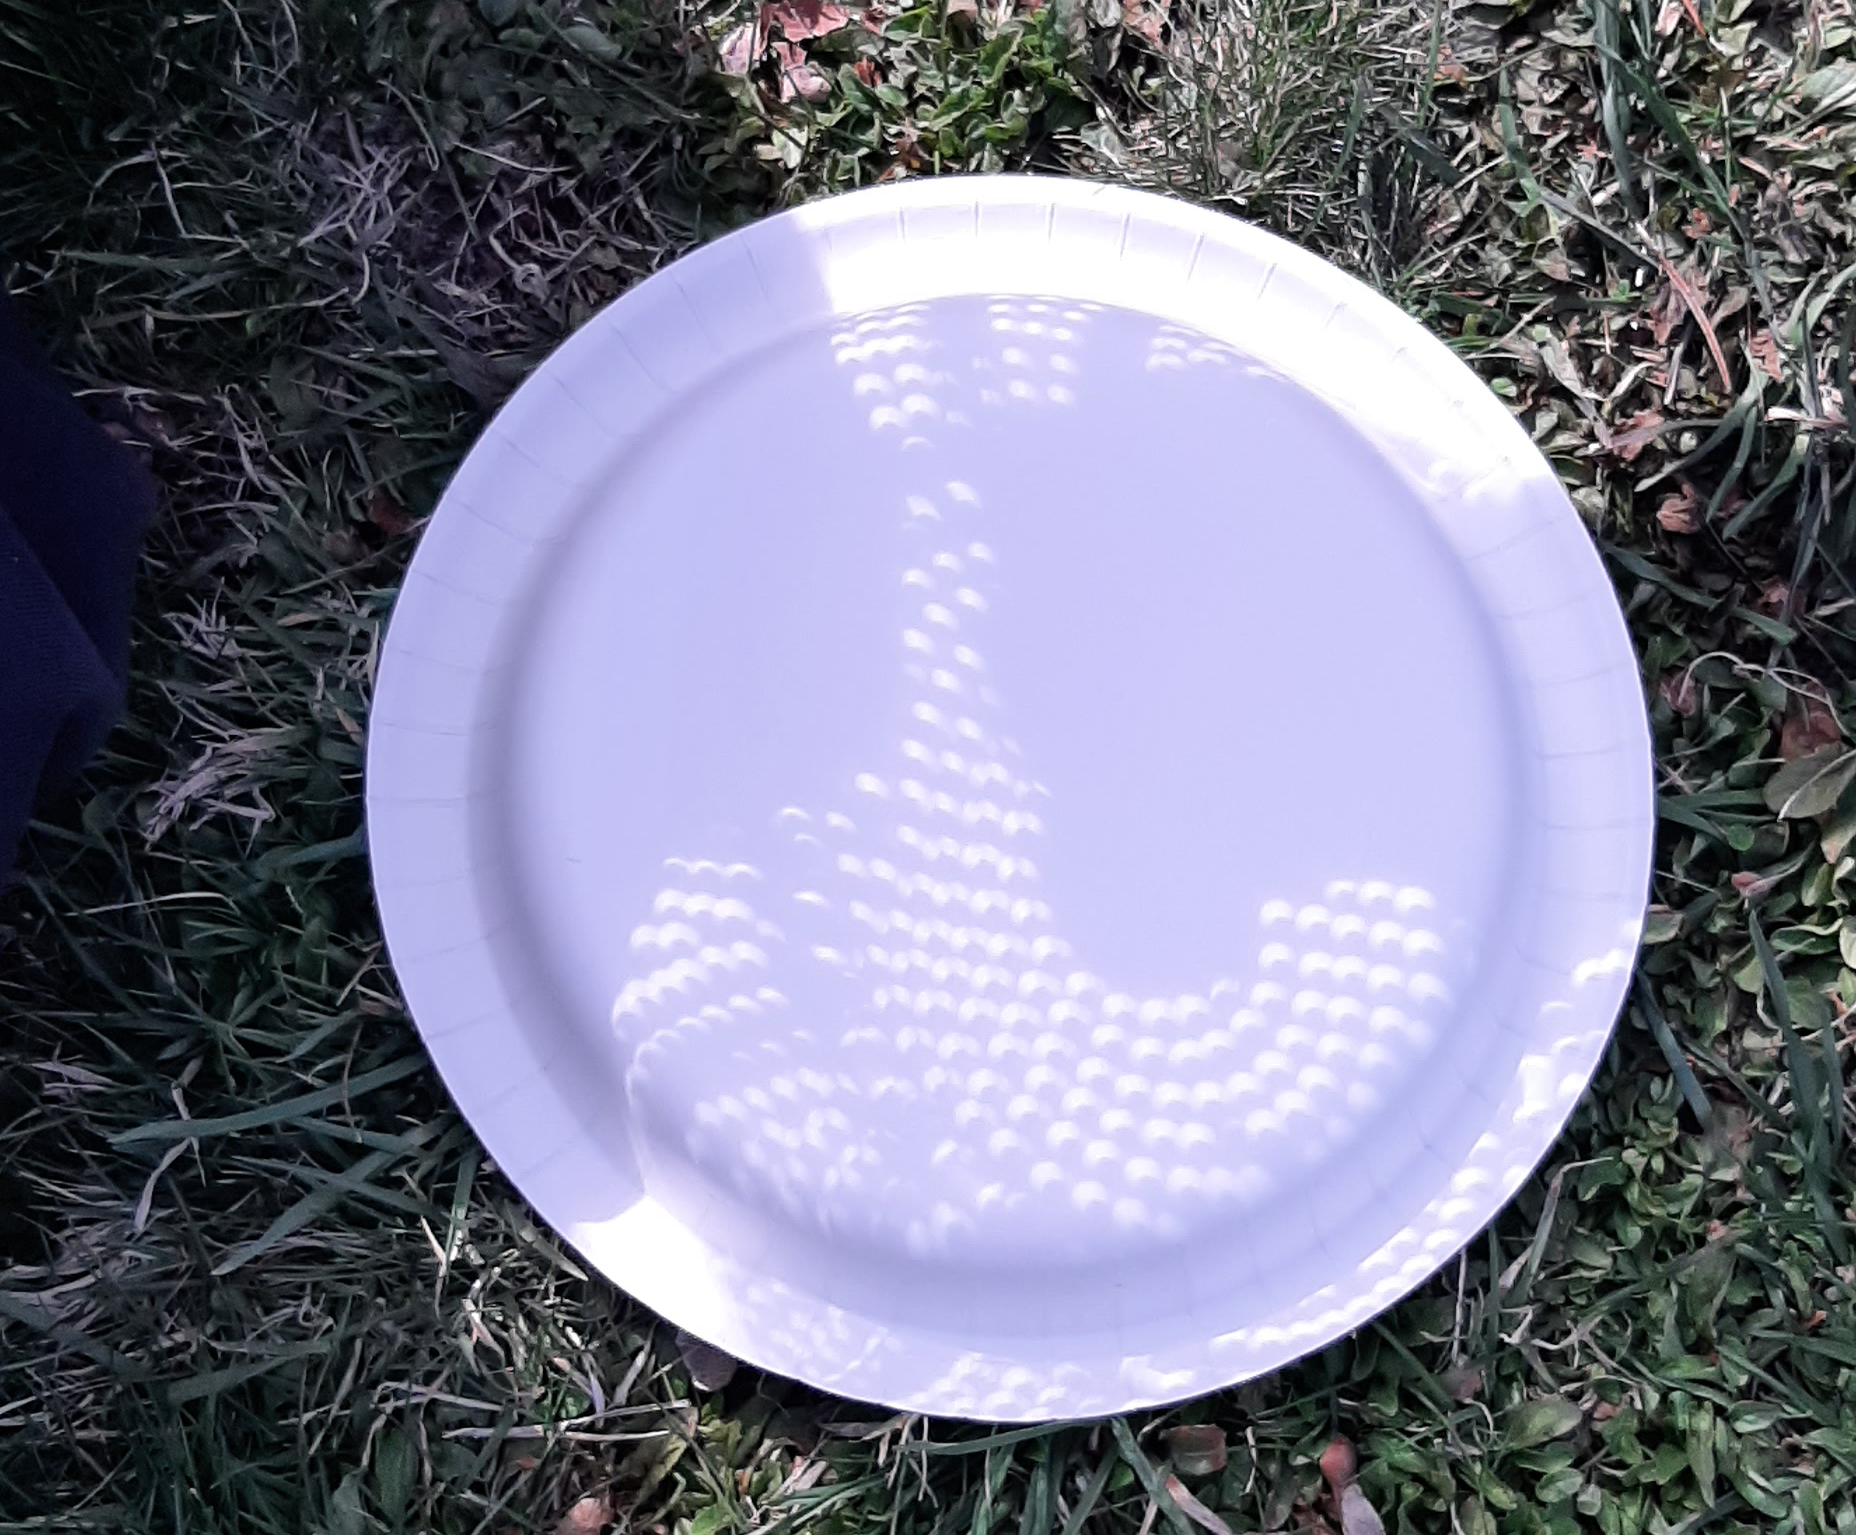 White plate with a colander held above it, showing the Moon's shadow.